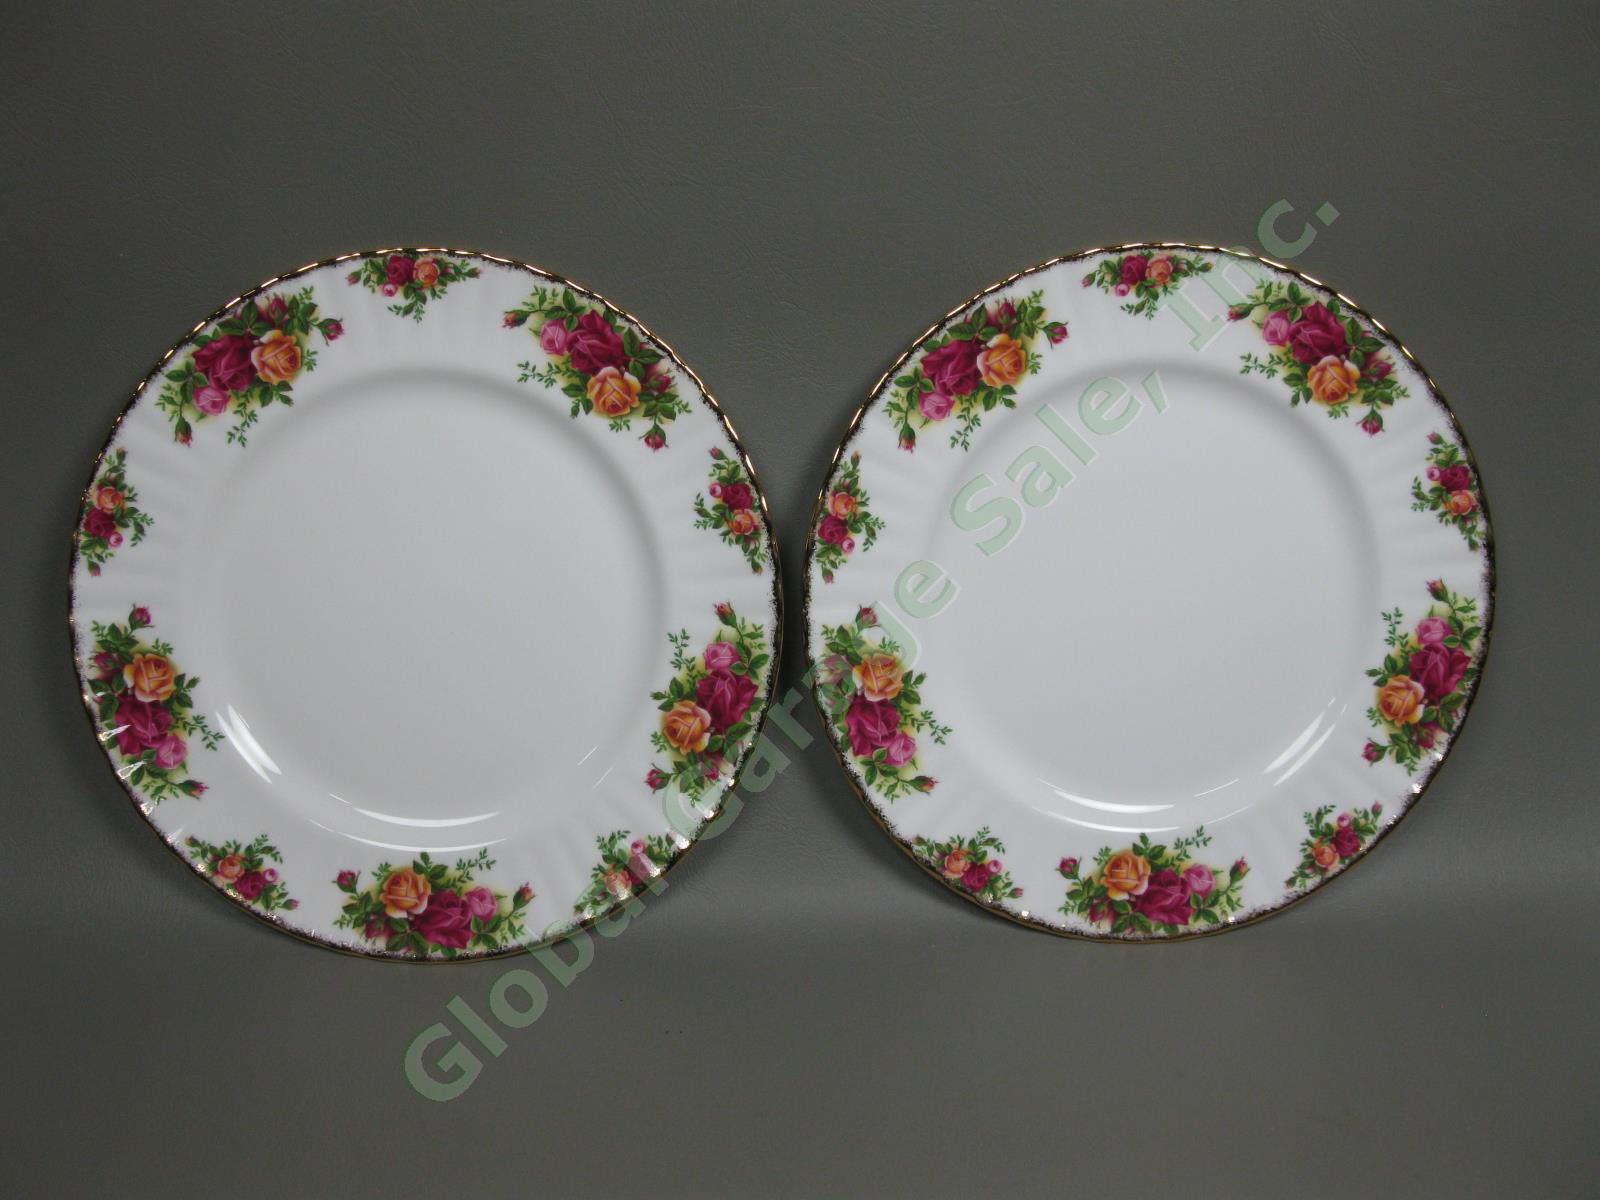 8 Royal Albert Old Country Roses Dinner Plate Fluted Gold Trim Bone China Set NR 14